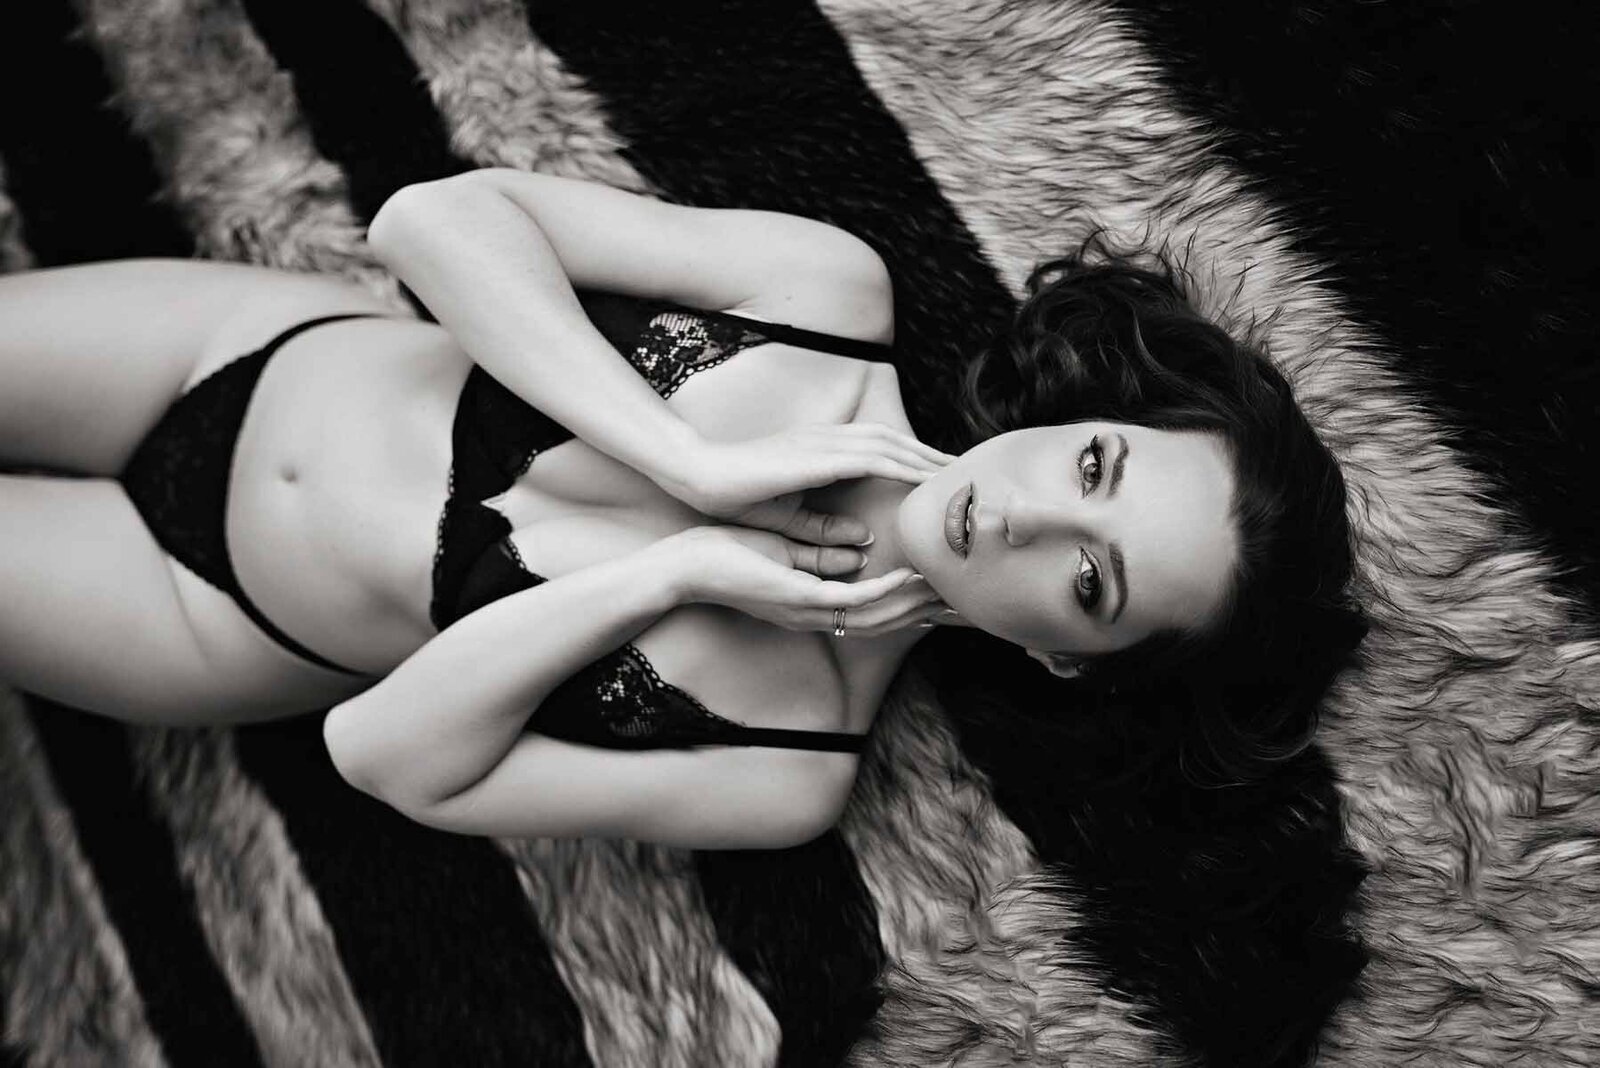 Black and white boudoir portrait of woman laying on striped rug